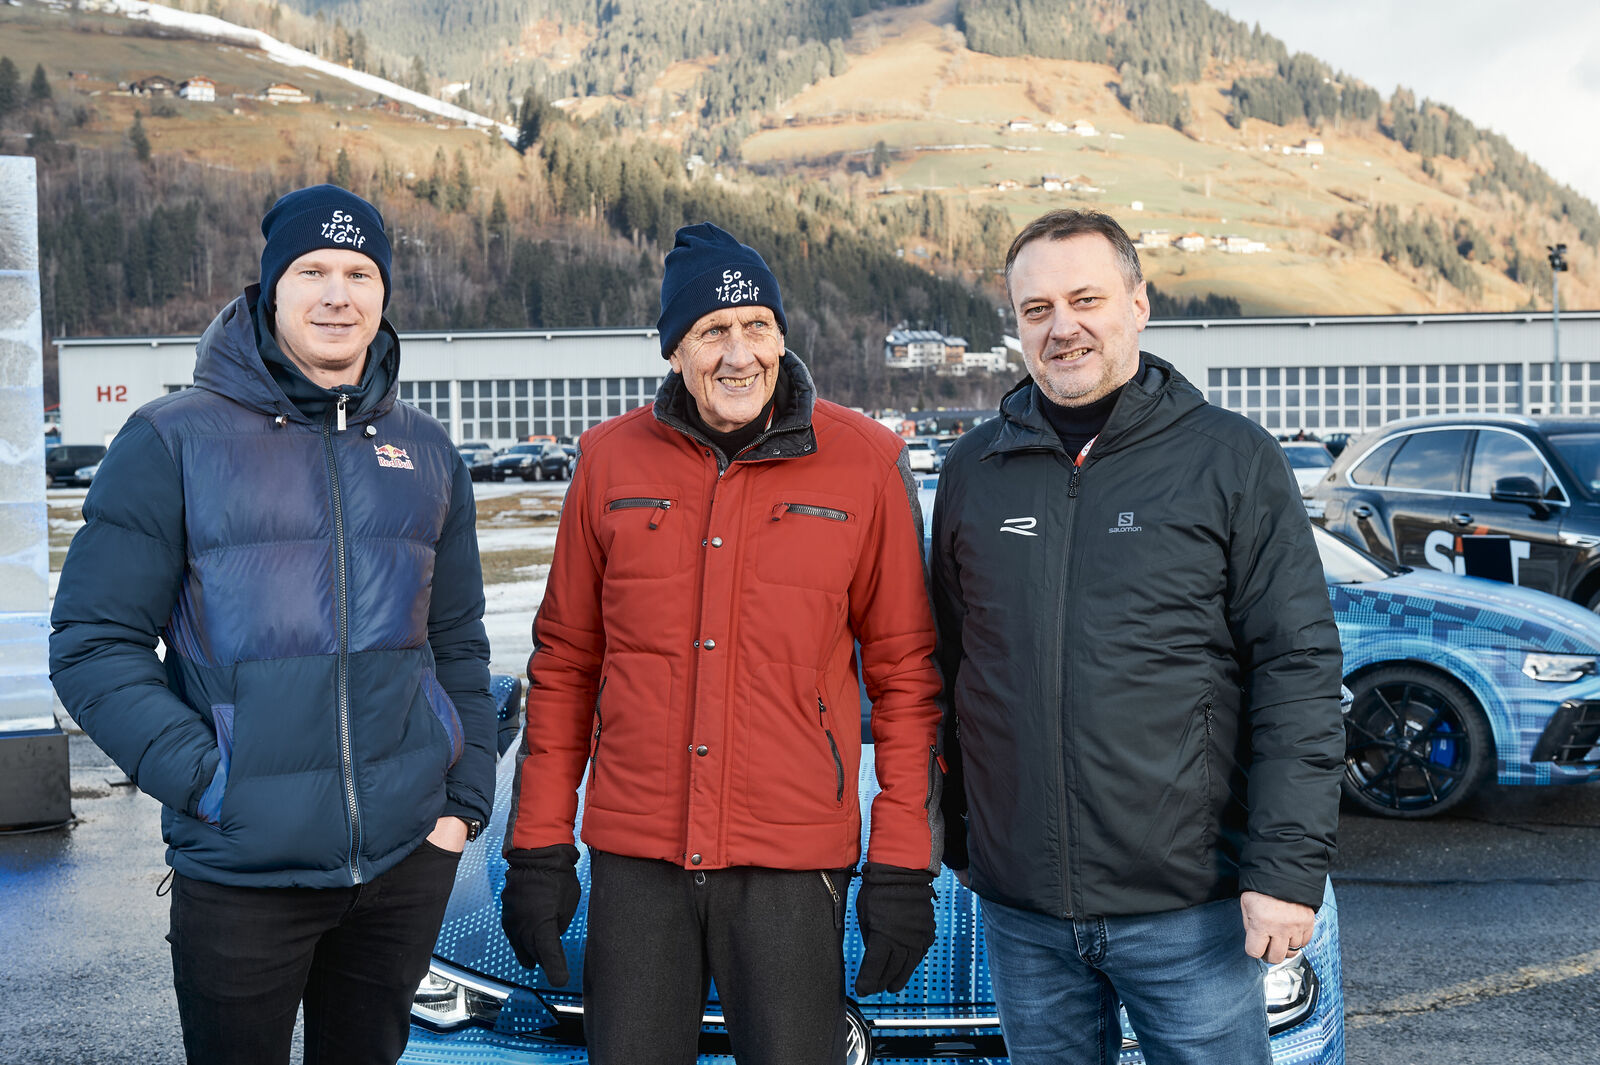 Ice Race in Zell am See: Volkswagen offers a first glimpse of the new Golf R